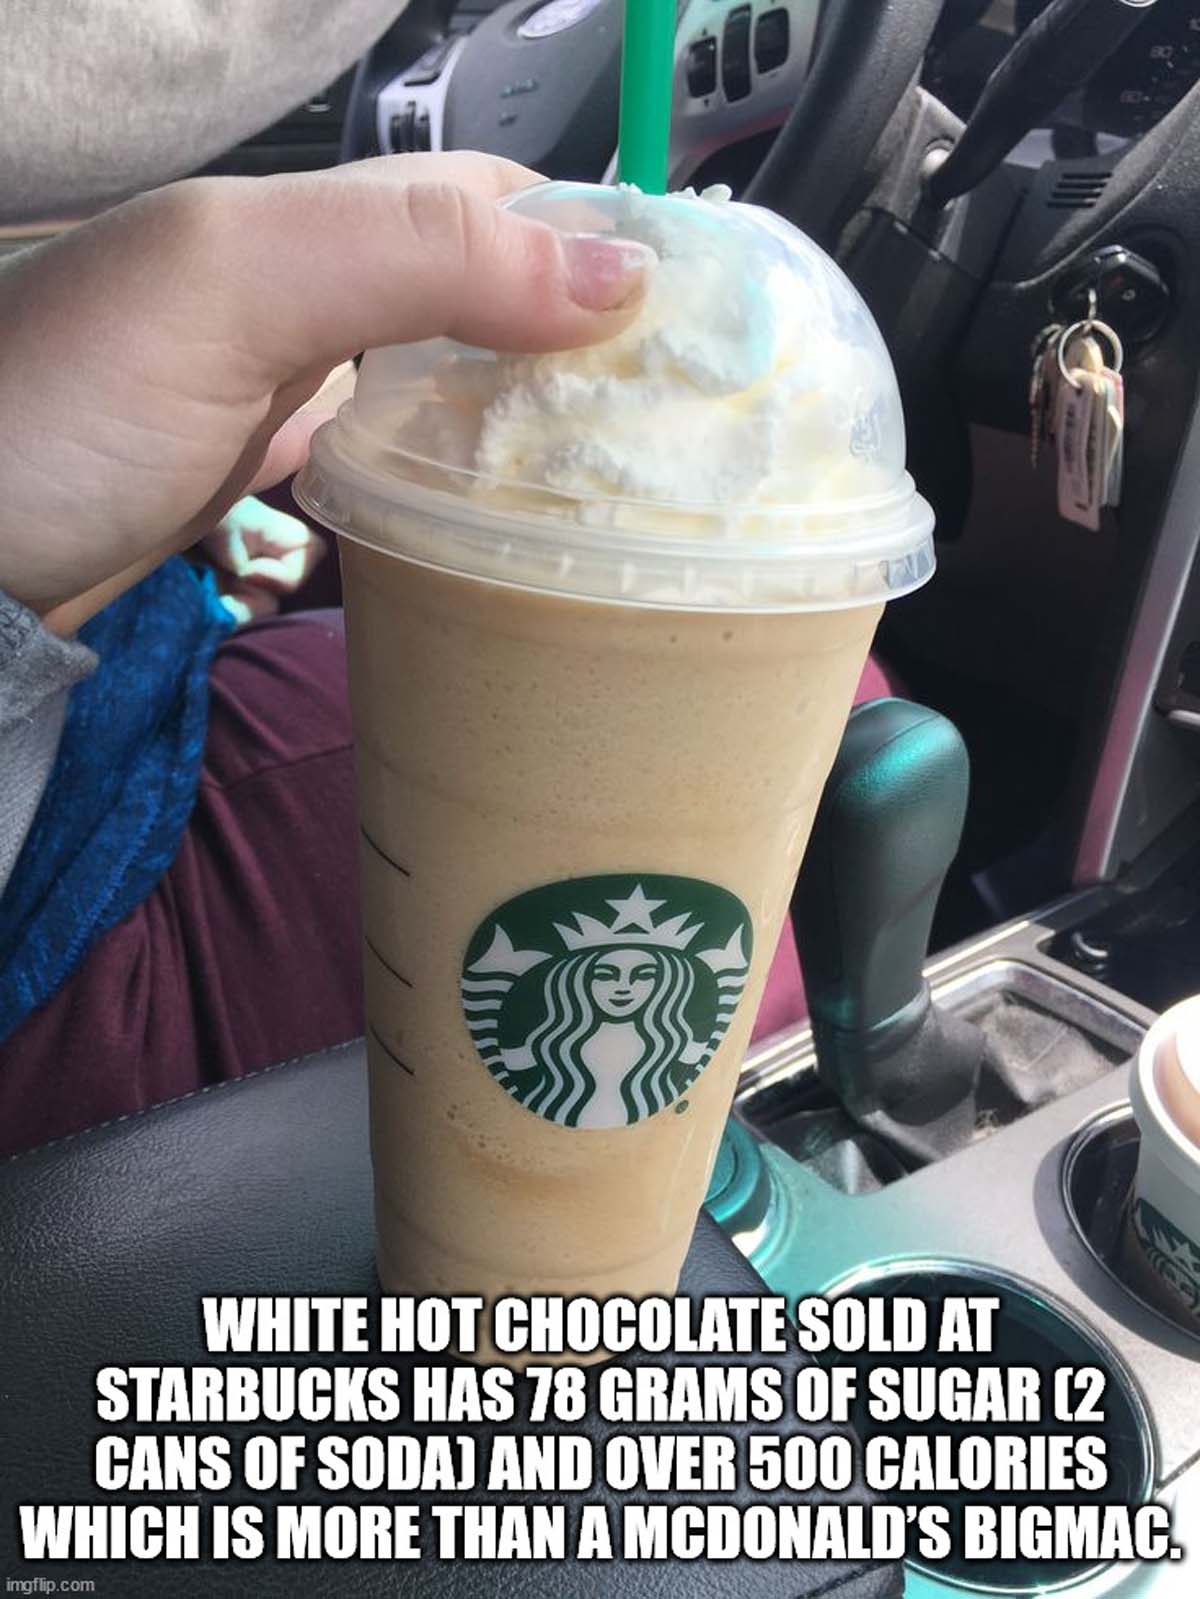 frappé coffee - White Hot Chocolate Sold At Starbucks Has 78 Grams Of Sugar 2 Cans Of Soda And Over 500 Calories Which Is More Than A Mcdonald'S Bigmac. imgflip.com